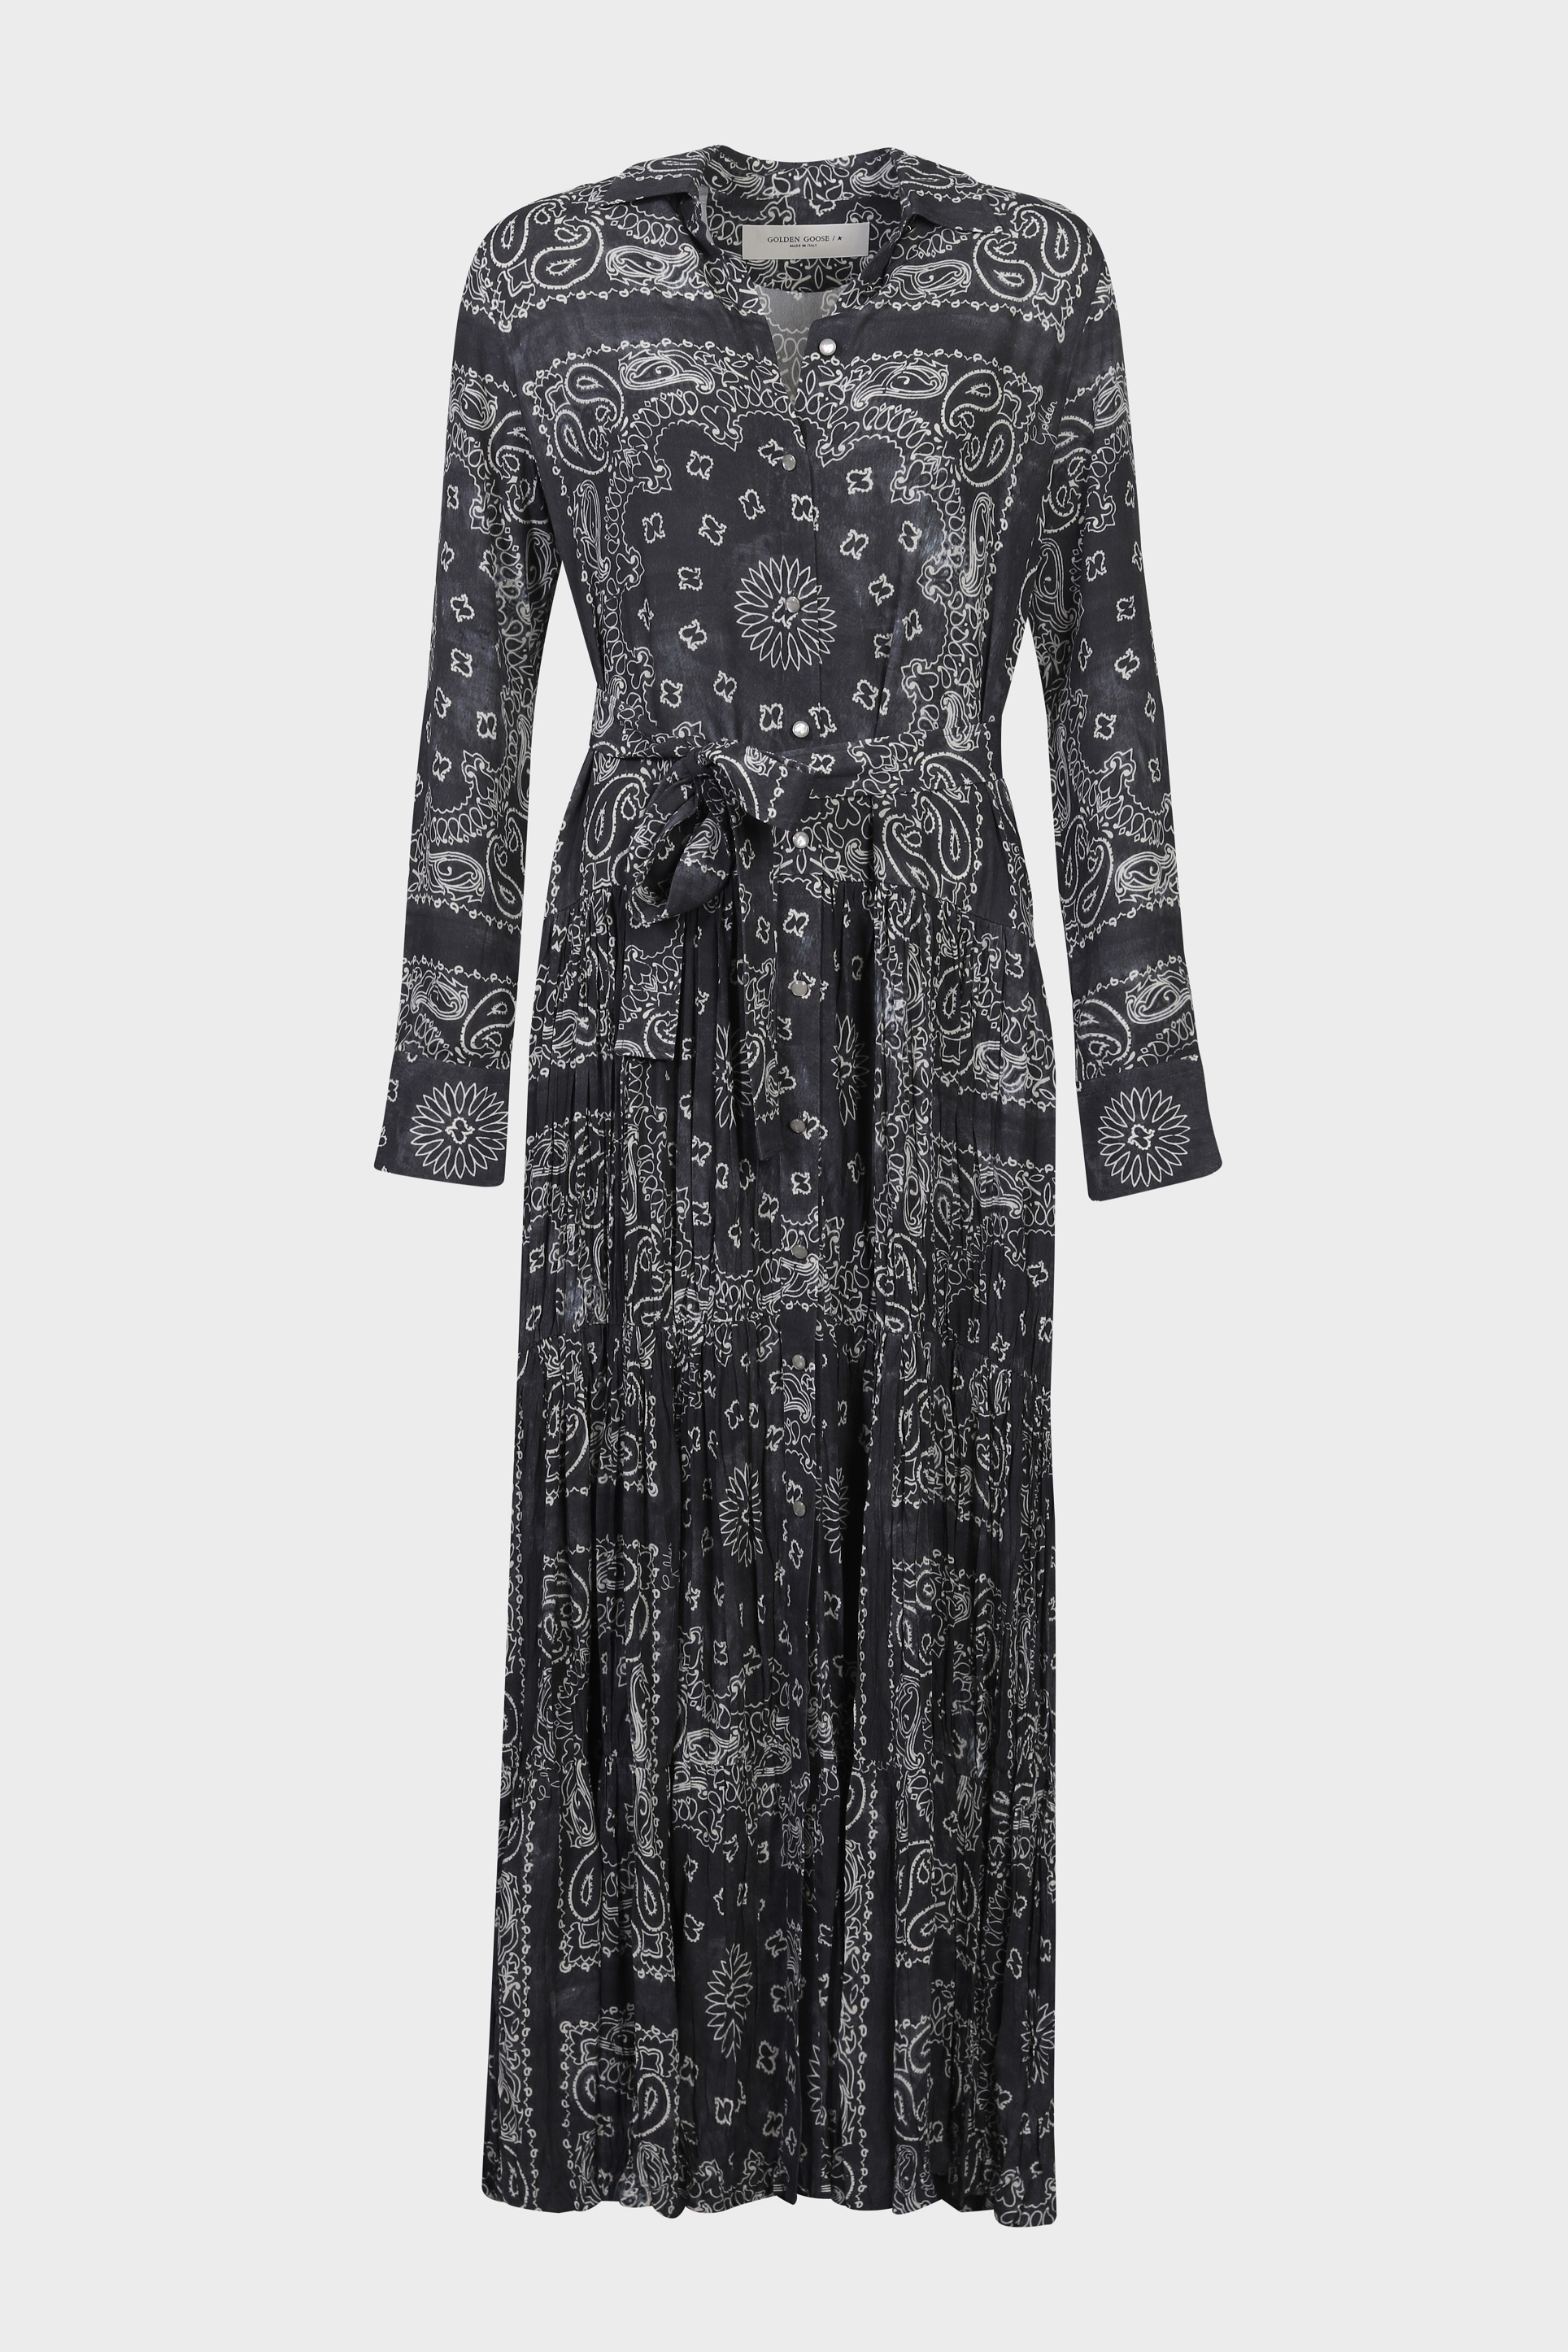 GOLDEN GOOSE Long Dress in Anthracite Paisley Print